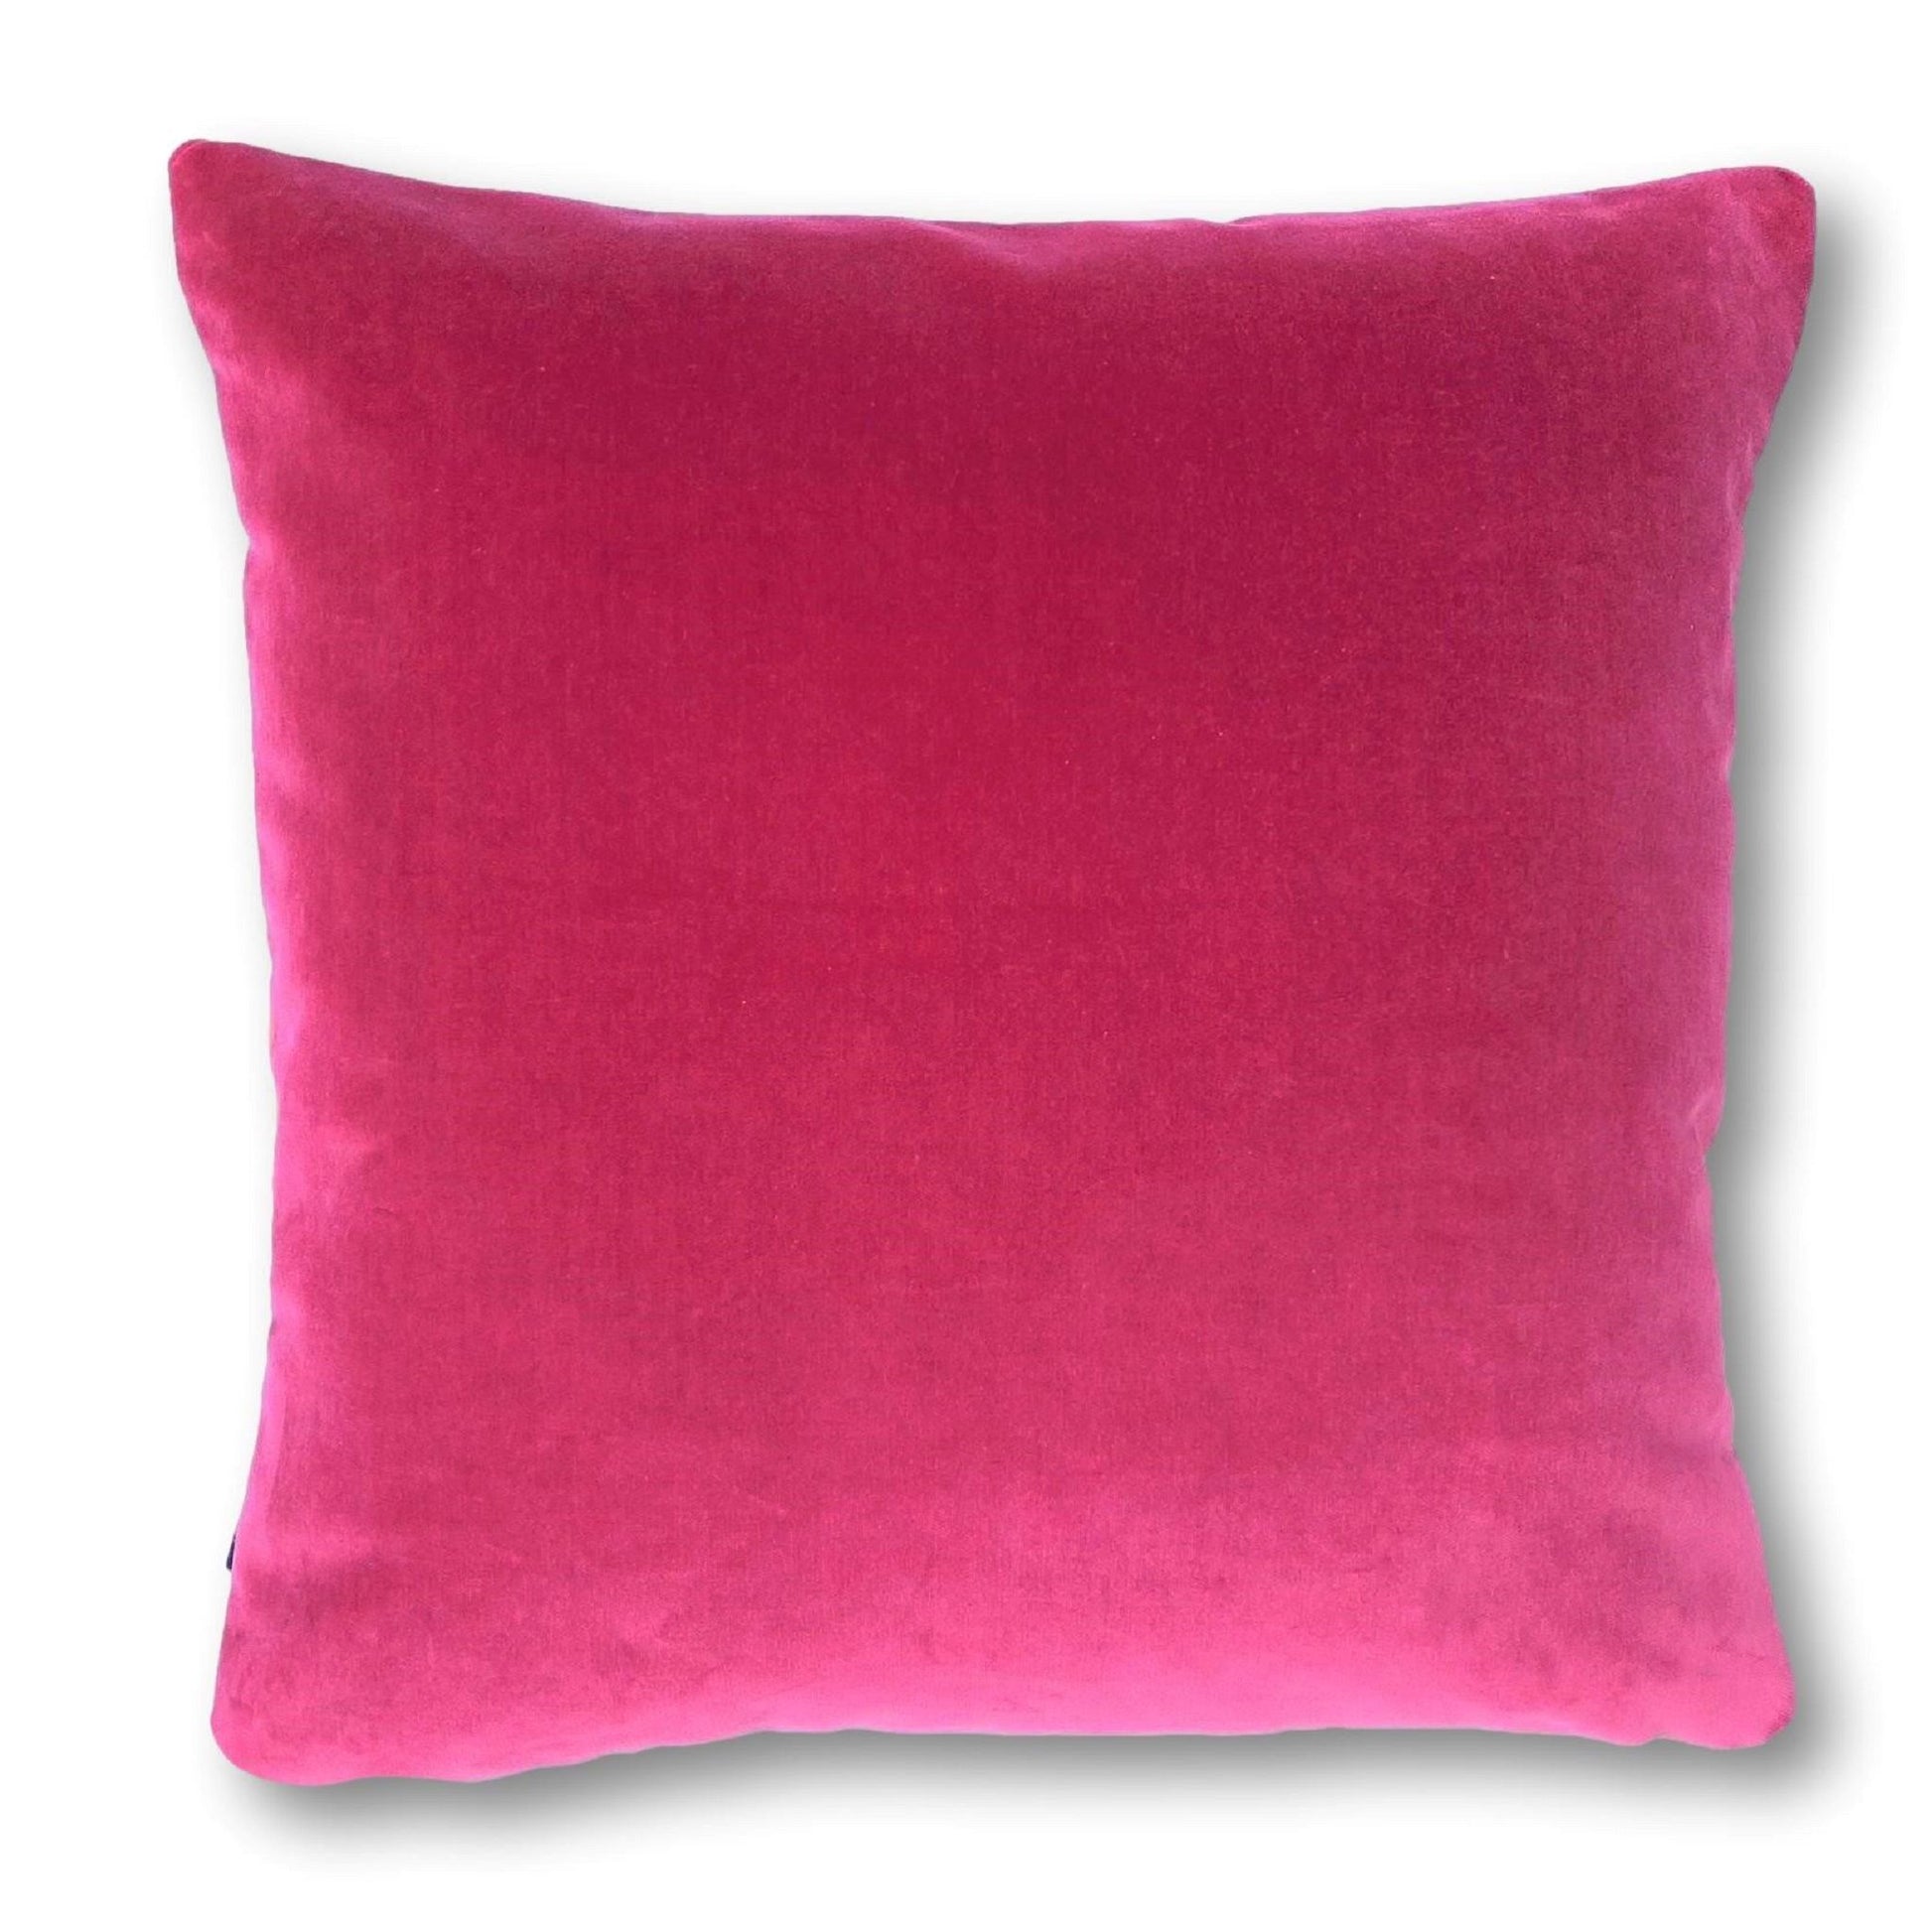 pink teal cushion covers